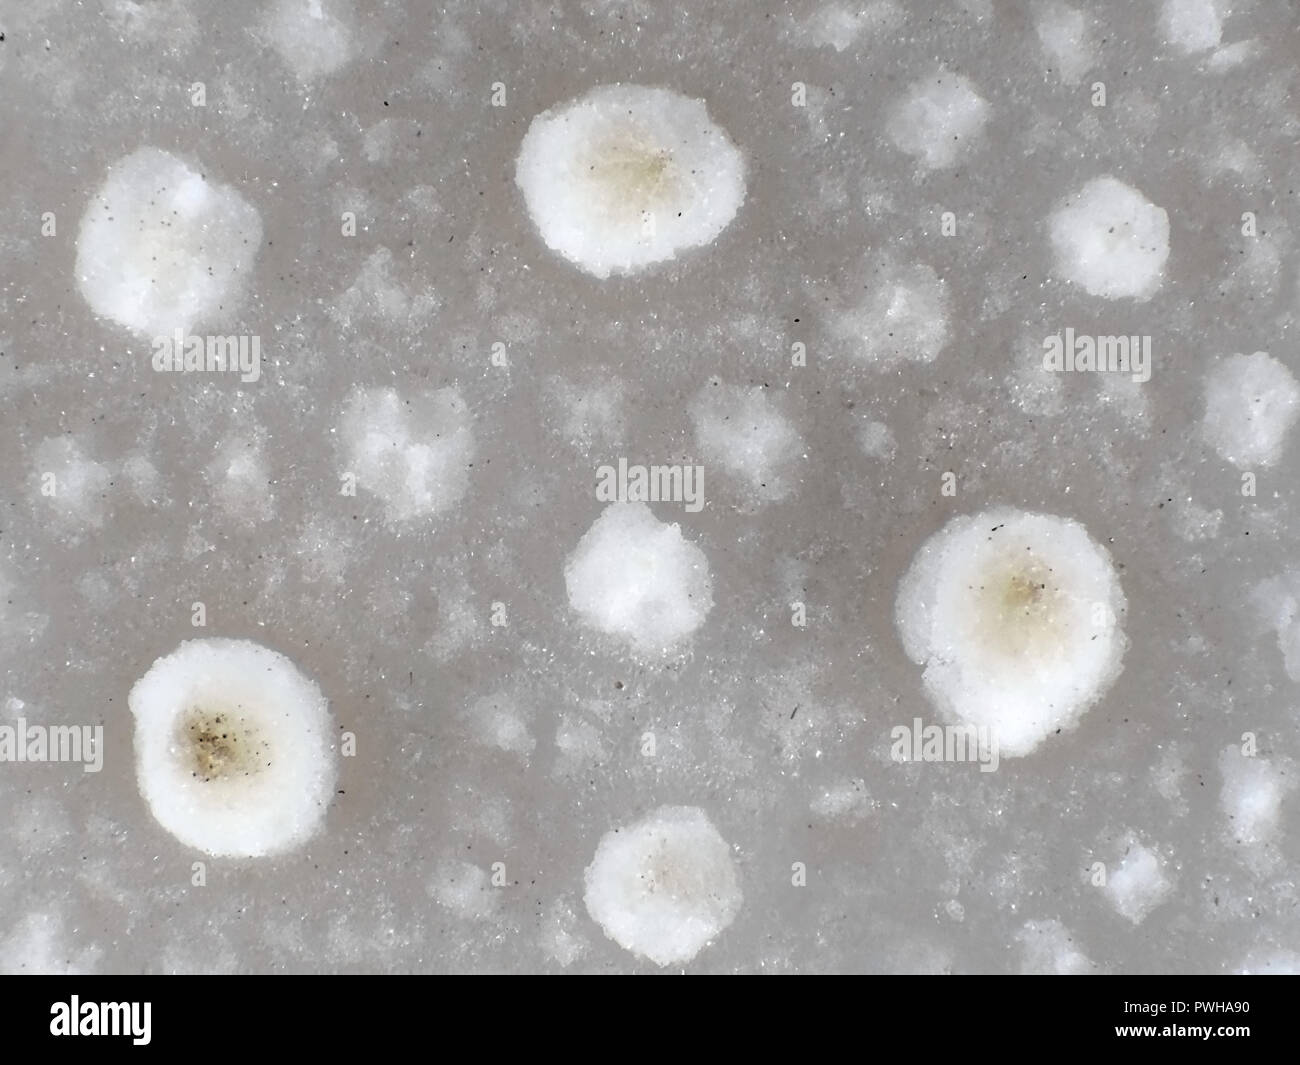 Light micrograph of gem-studded puffball (Lycoperdon perlatum) surface, field of view is about 3mm wide Stock Photo